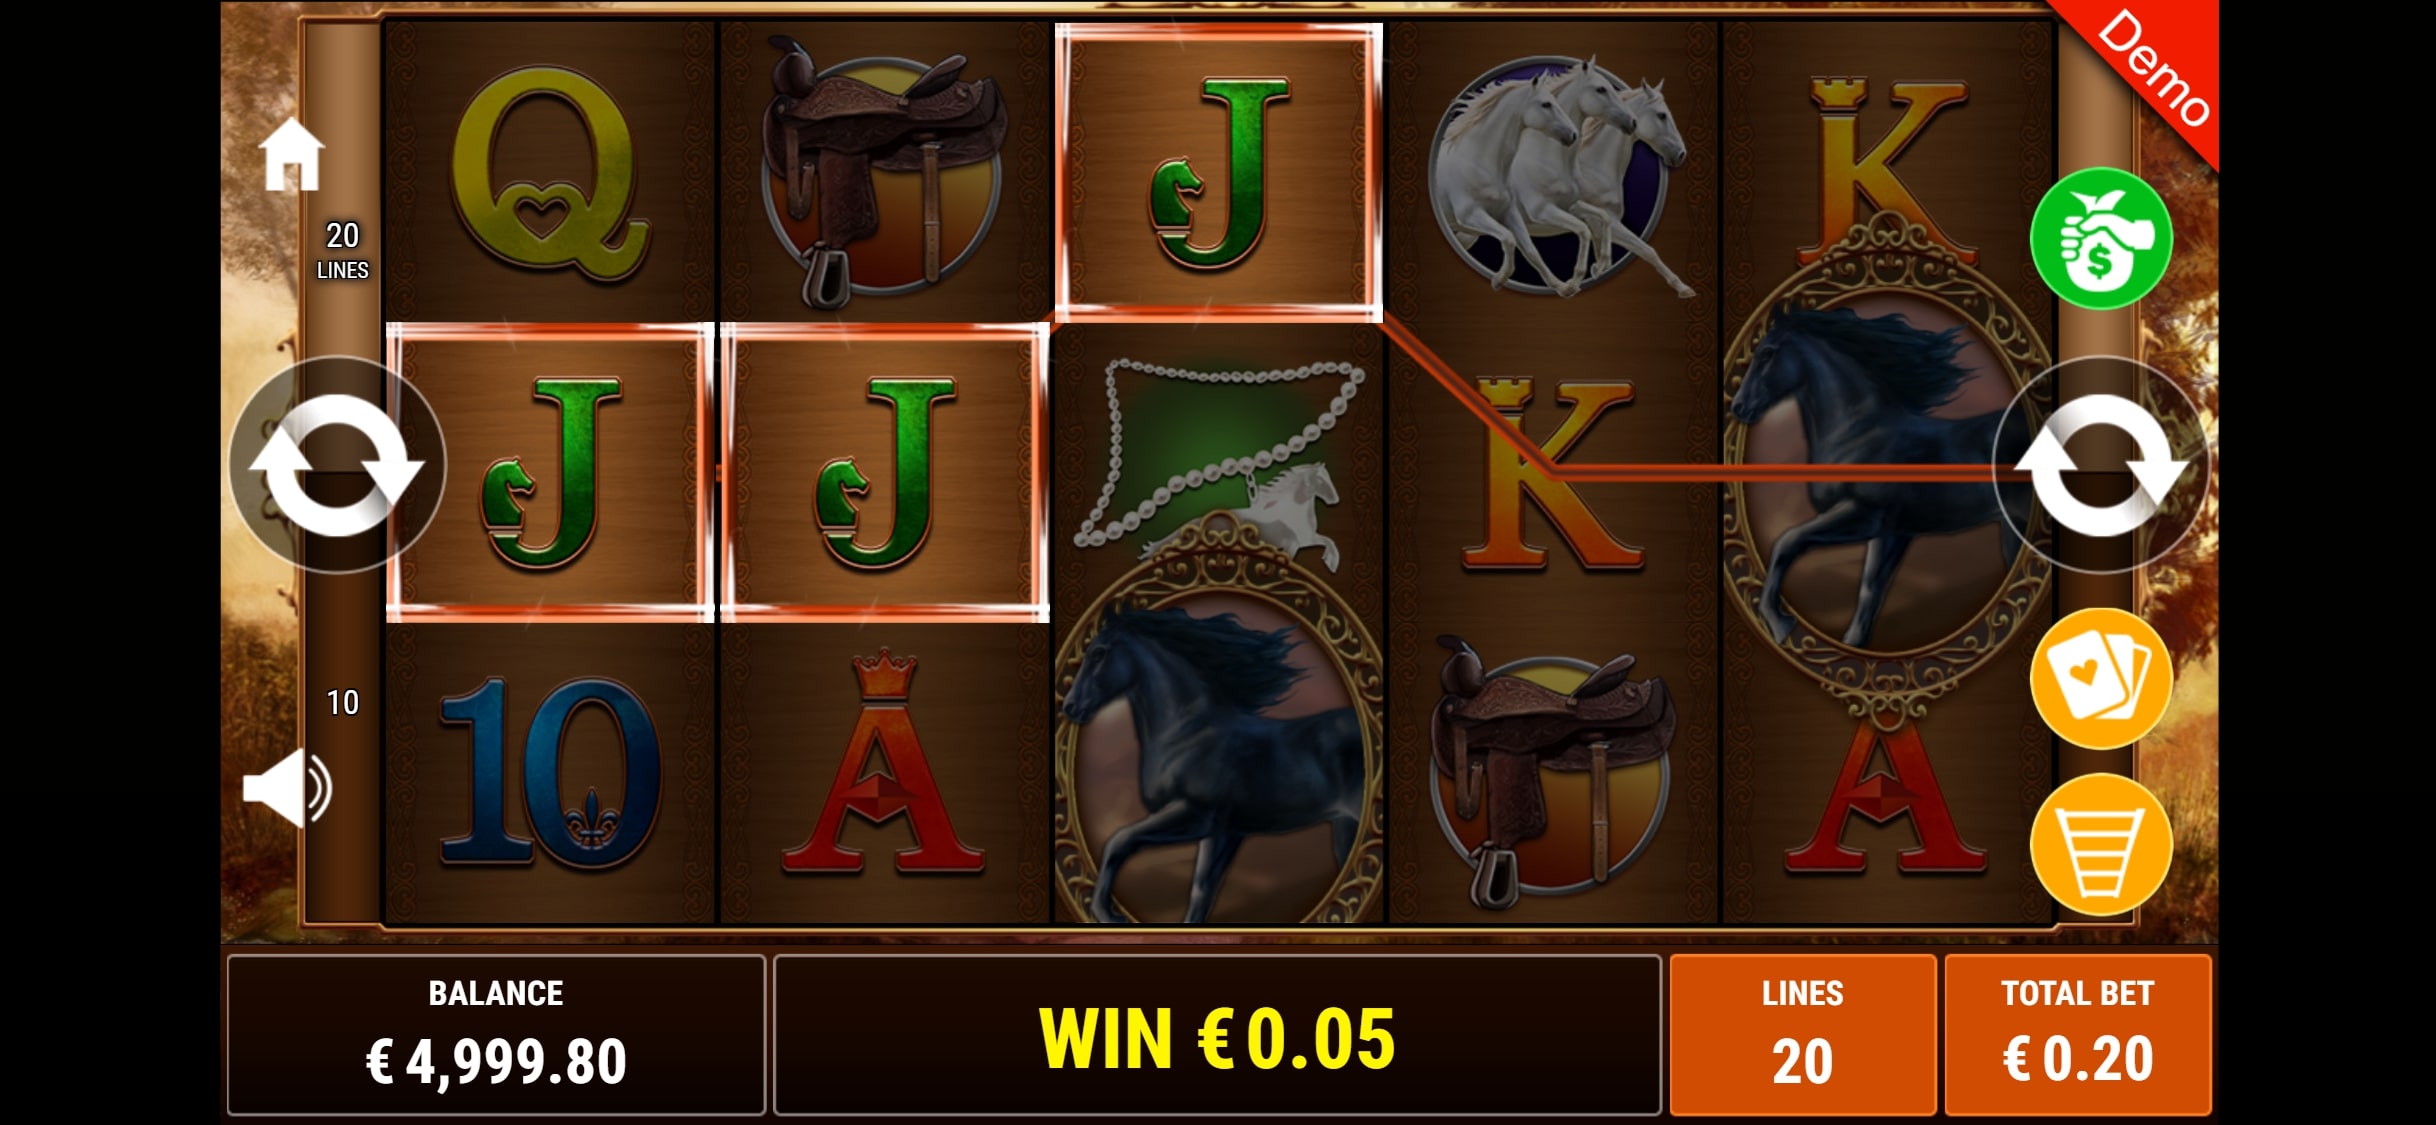 Wolfycasino Mobile Slot Games Review